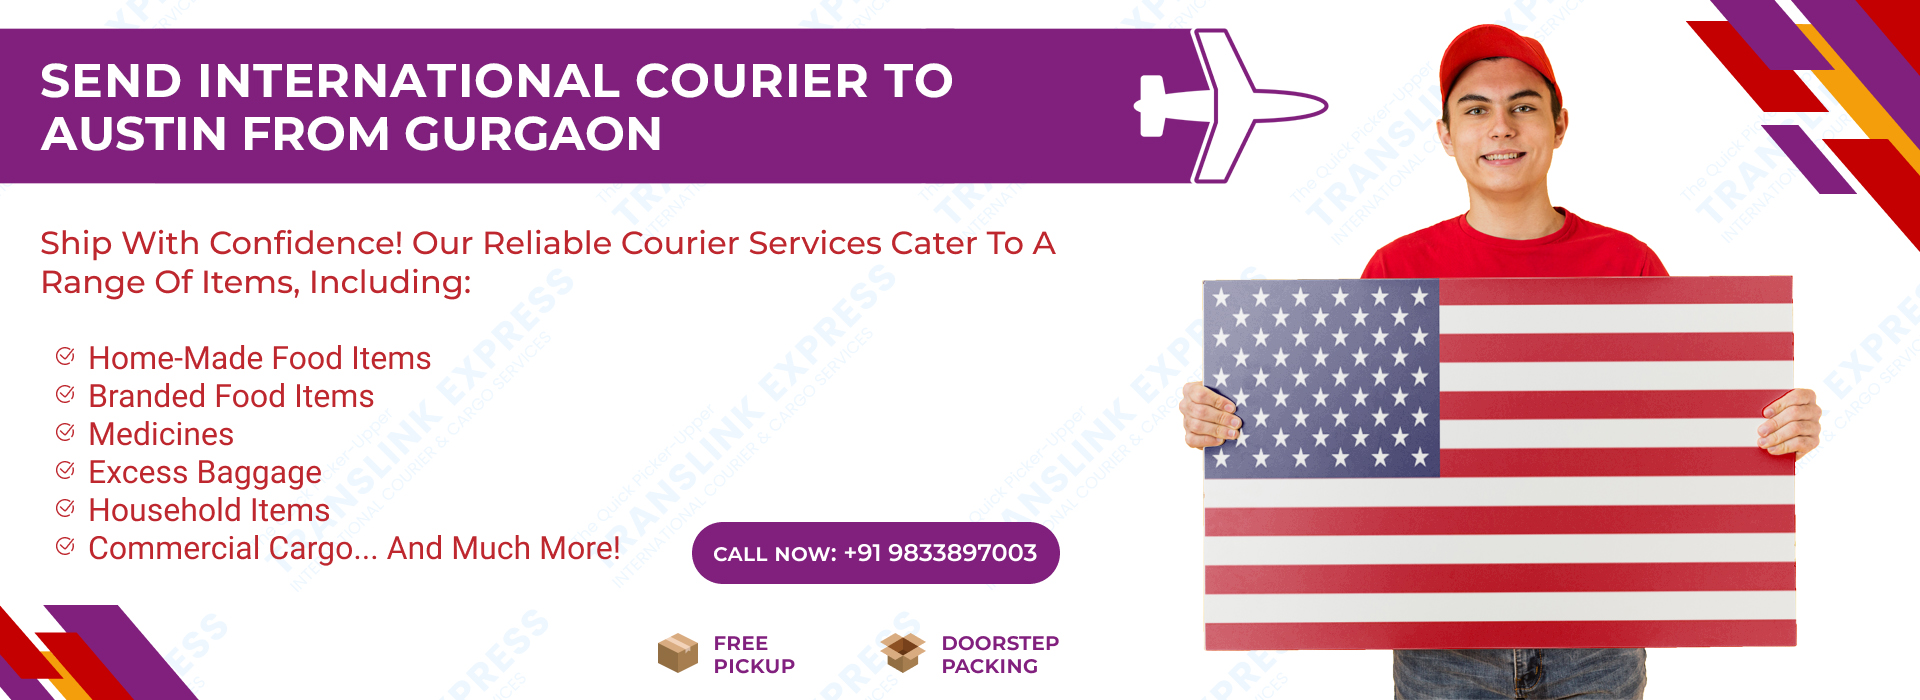 Courier to Austin From Gurgaon